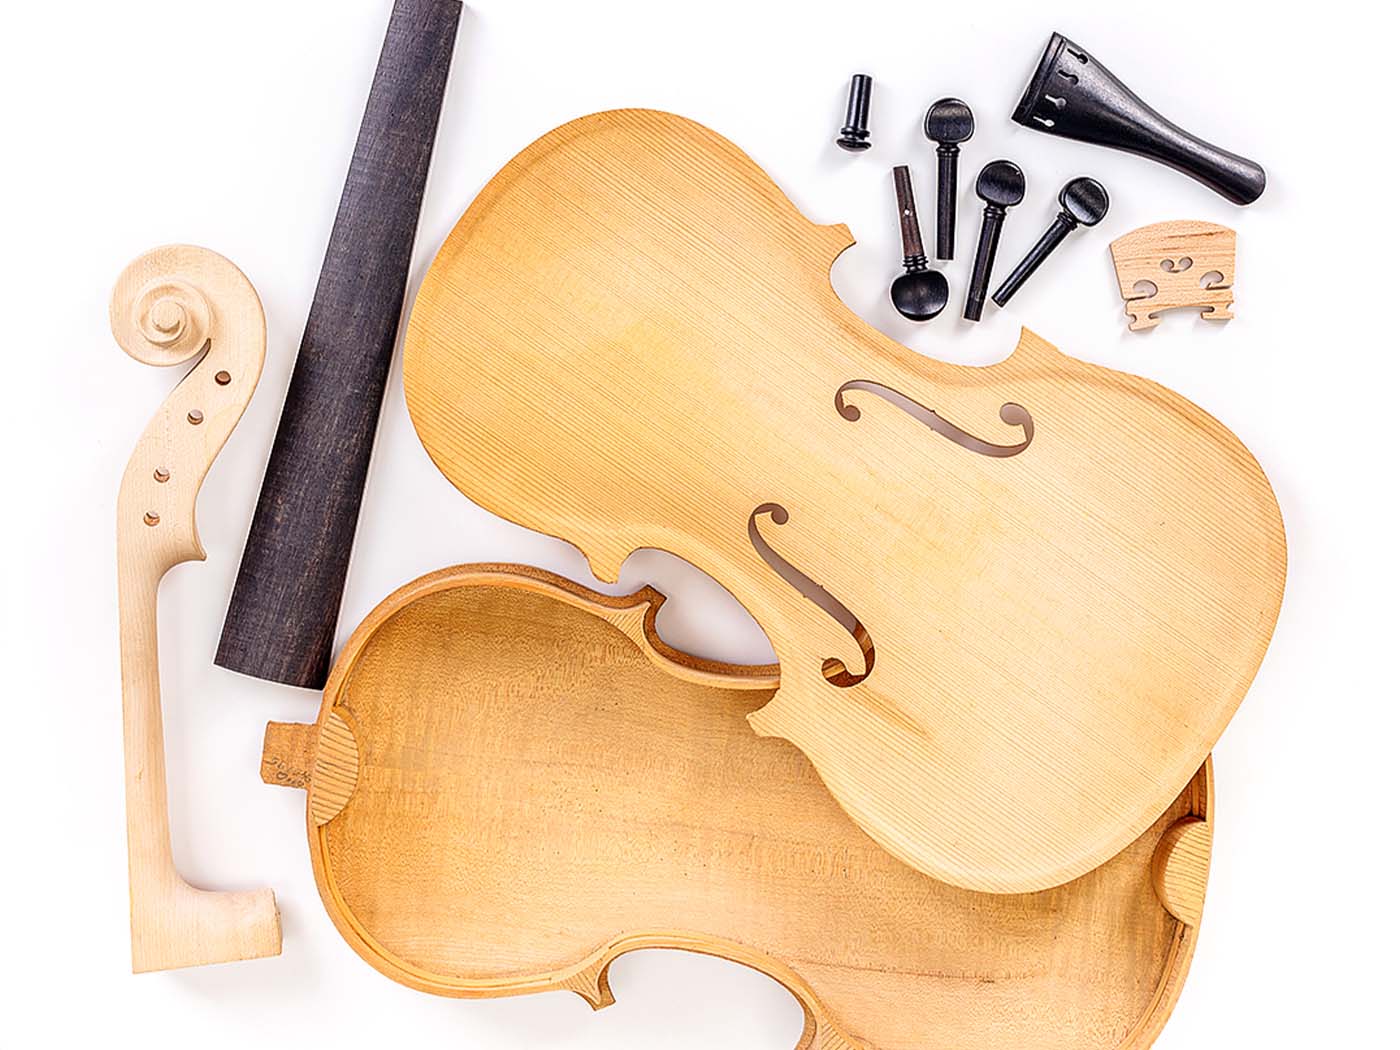 Anatomy of the Violin and the Bow